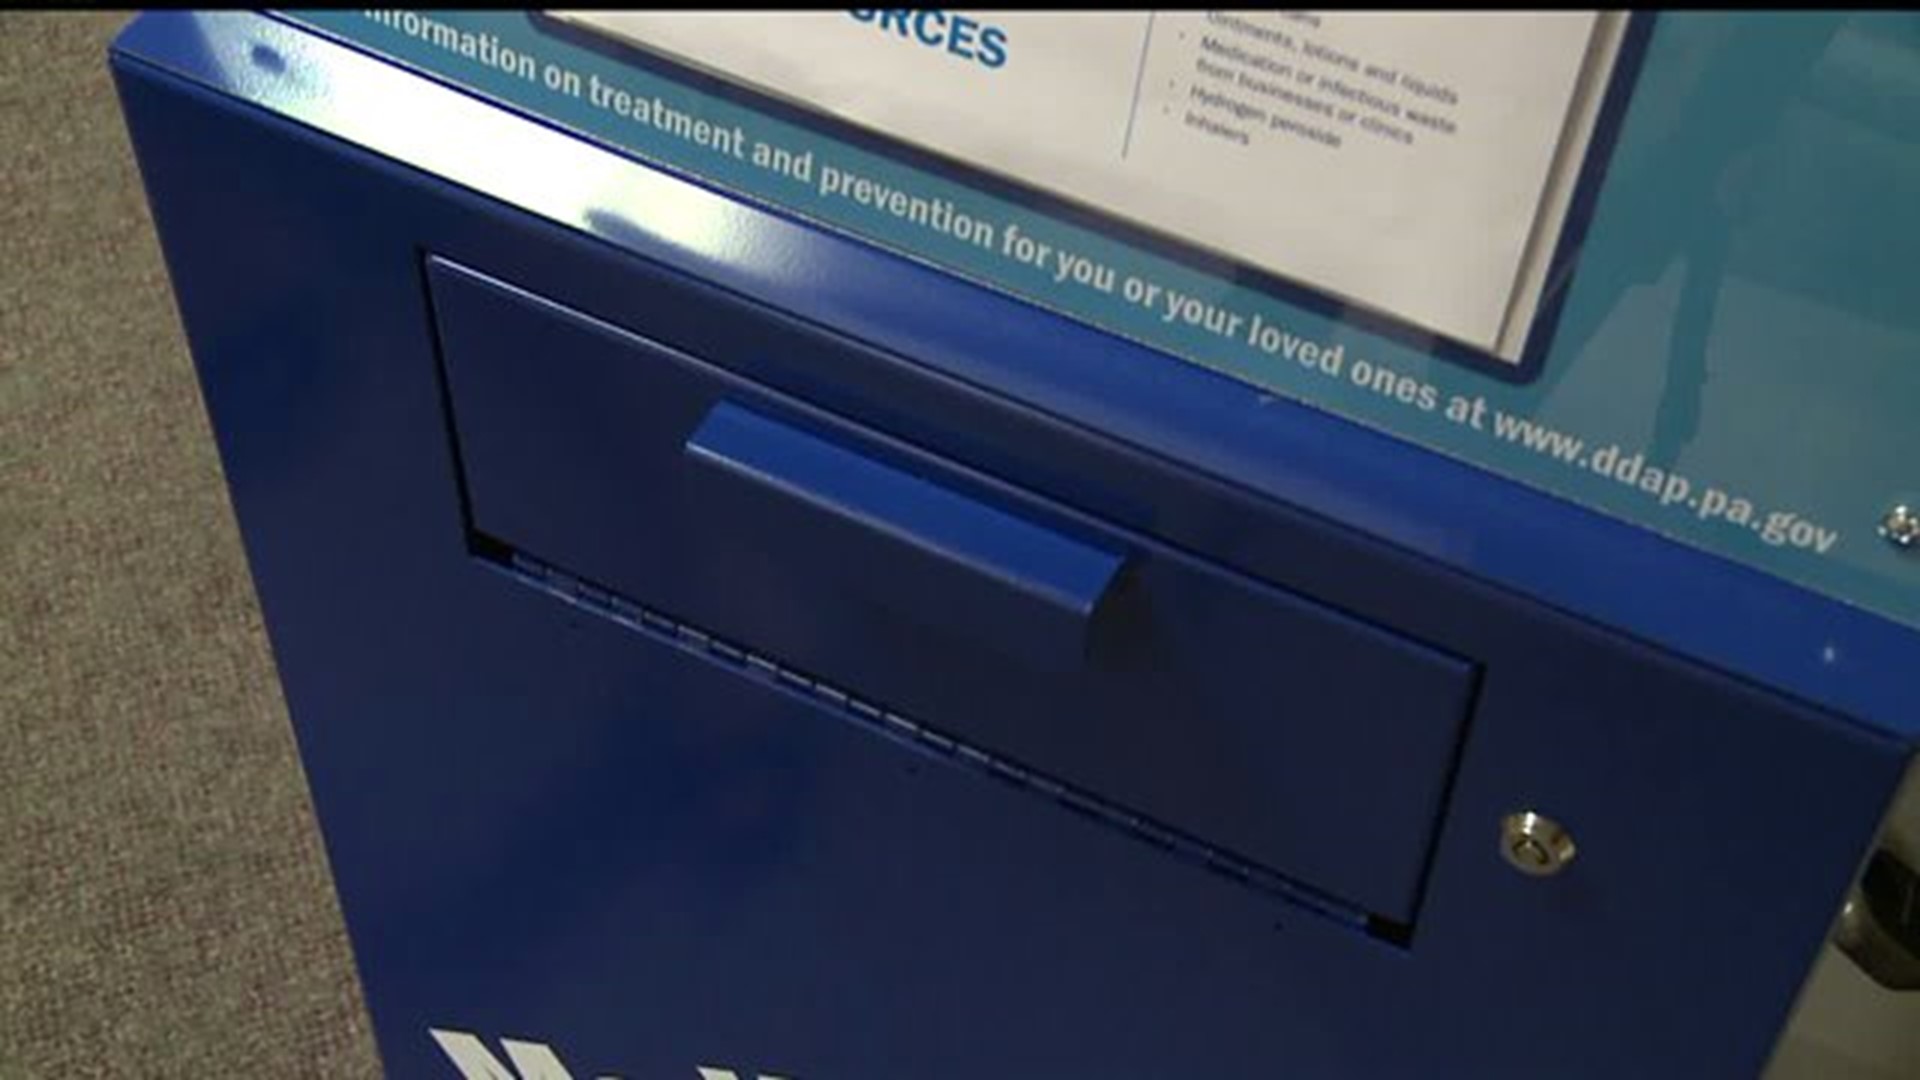 Medication Collection Box Unveiled at Messiah College